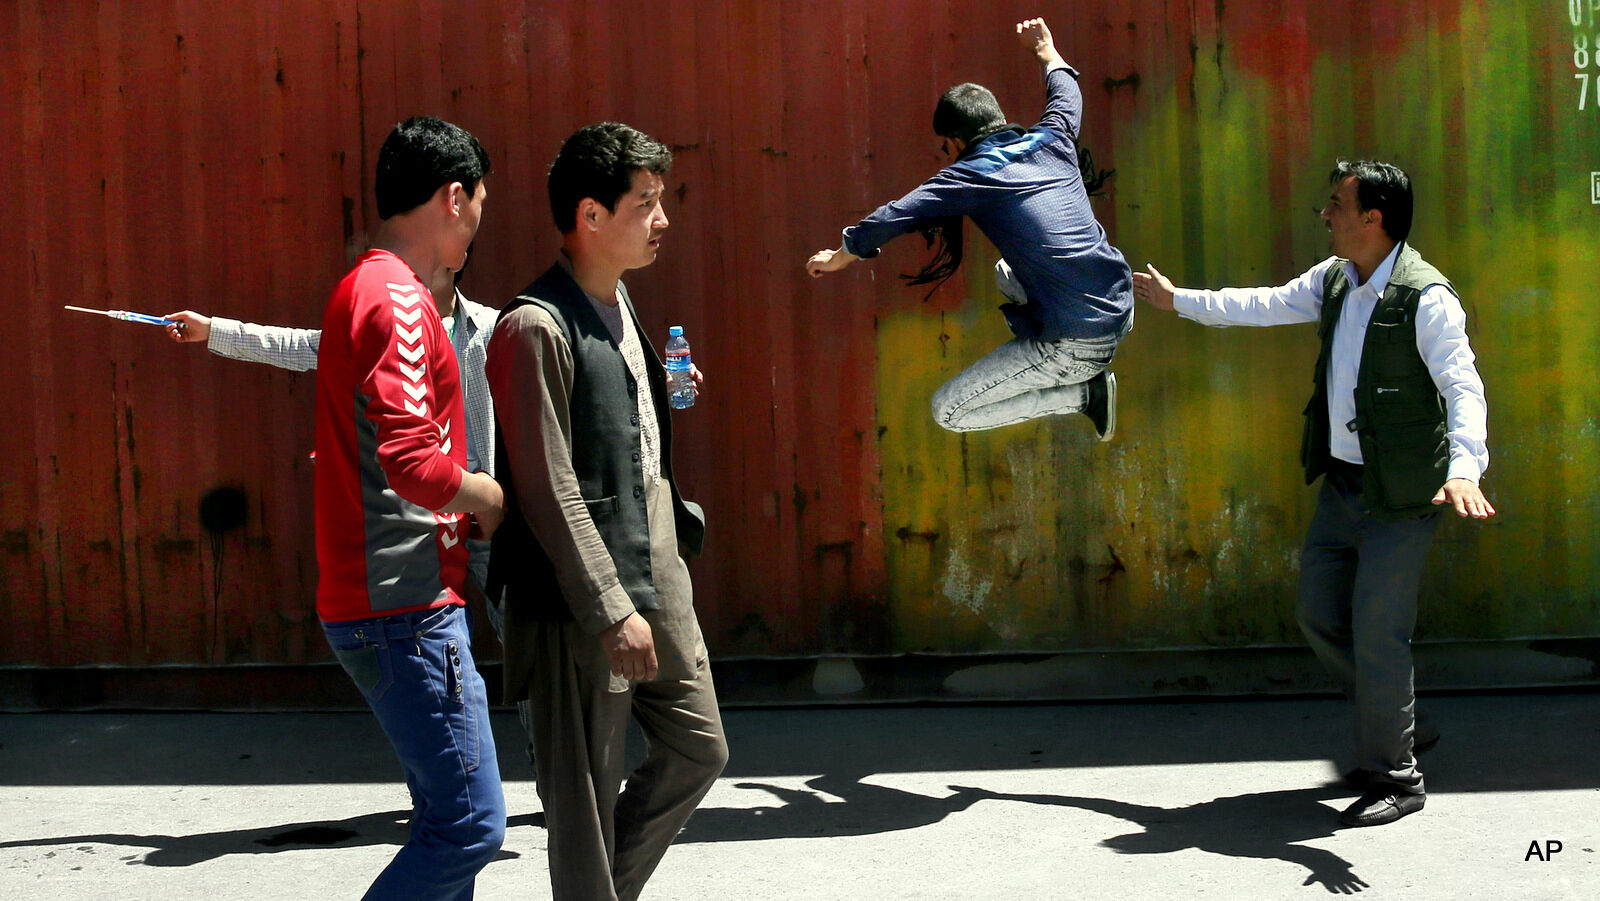 A protester, second right, kicks a container during a massive anti-government protest in Kabul, Afghanistan, Monday, May 16, 2016. Authorities locked down Afghanistan's capital Monday as tens of thousands of members of an ethnic minority group marched through the streets to protest the proposed route of a power line.